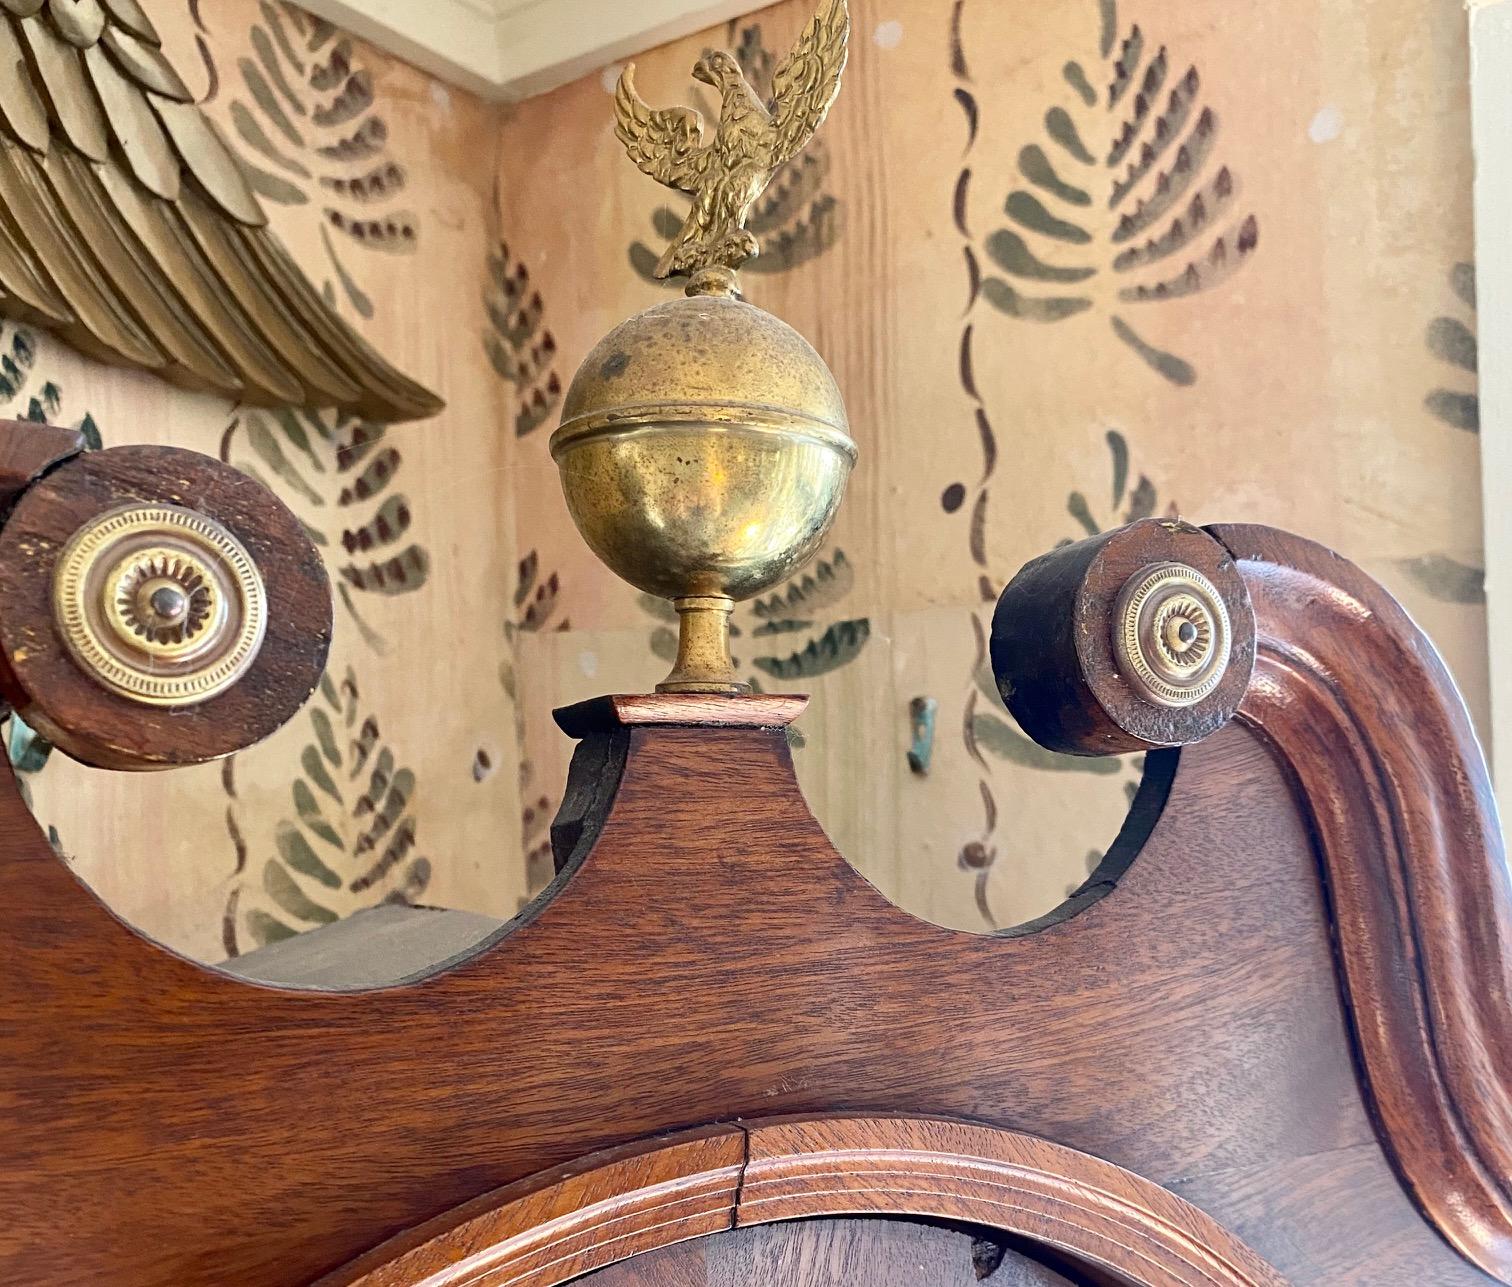 Early 19th century tall case clock by James Hogg, from village of Gifford near Edinborough, circa 1820, with fine mahogany case, brass finial on swan neck pediment, tombstone glazed door flanked by reeded columns with brass capitols, revealing a